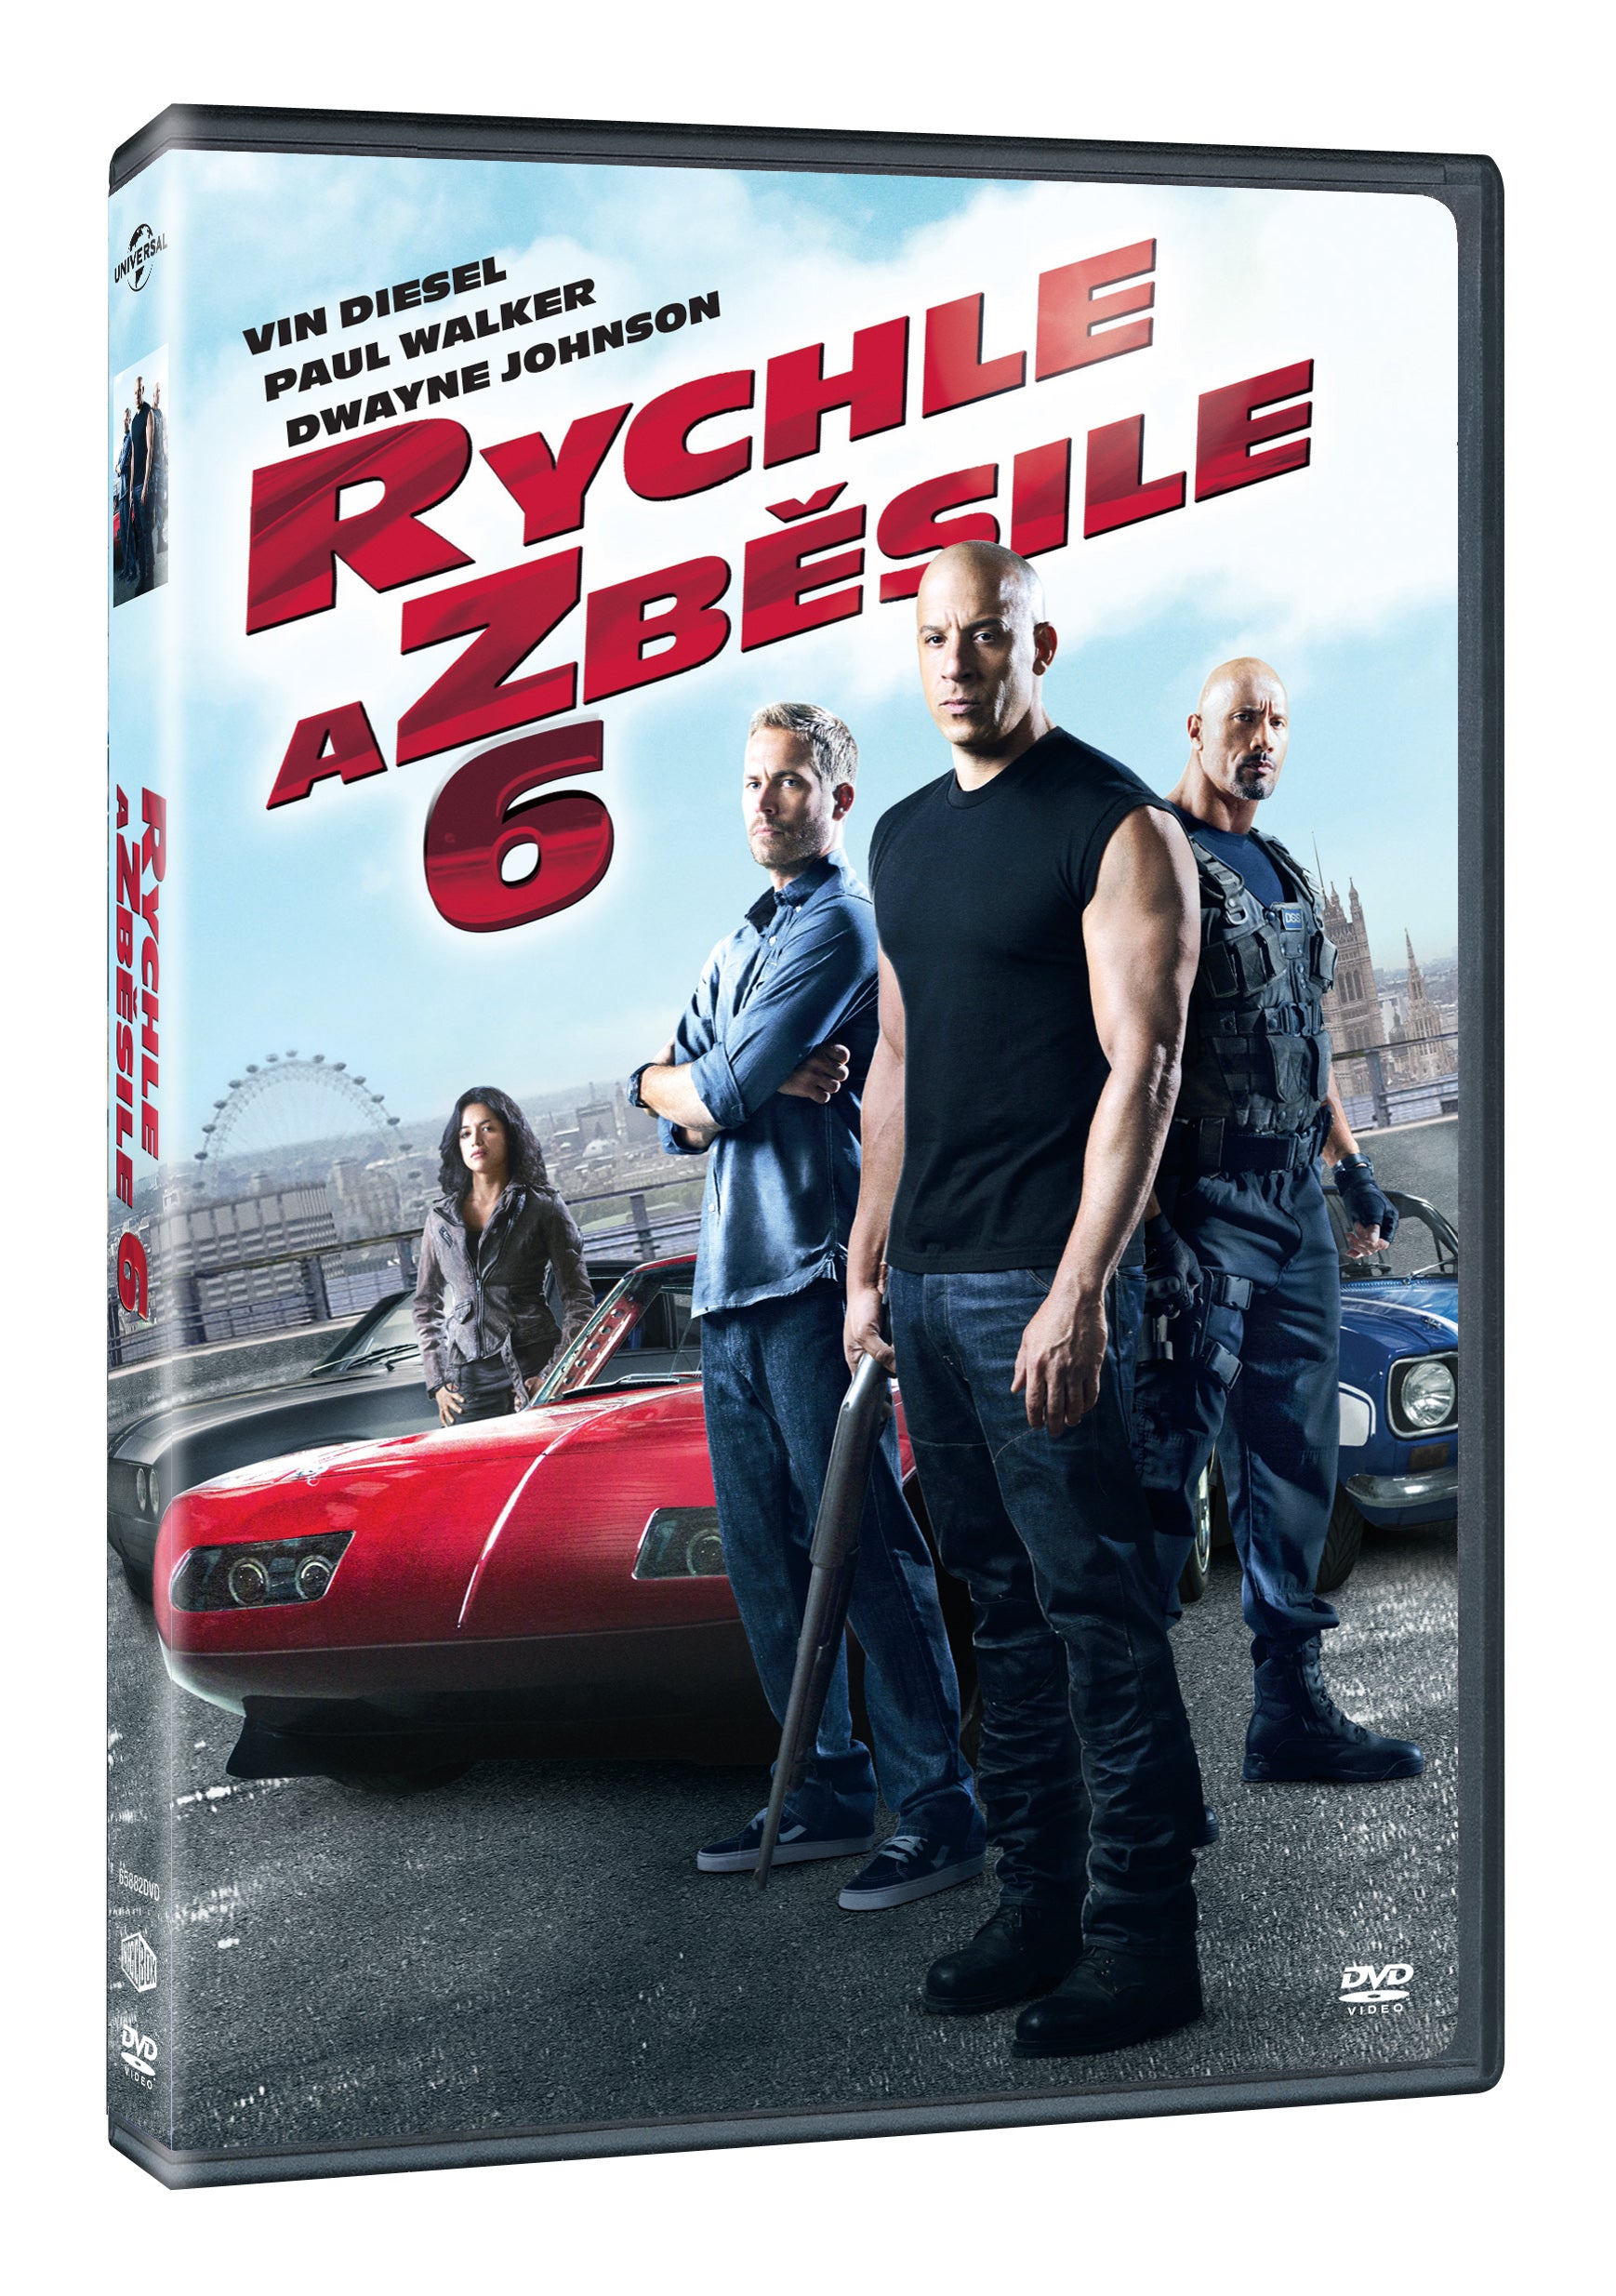 Rychle a zbesile 6 DVD / Fast & Furious 6